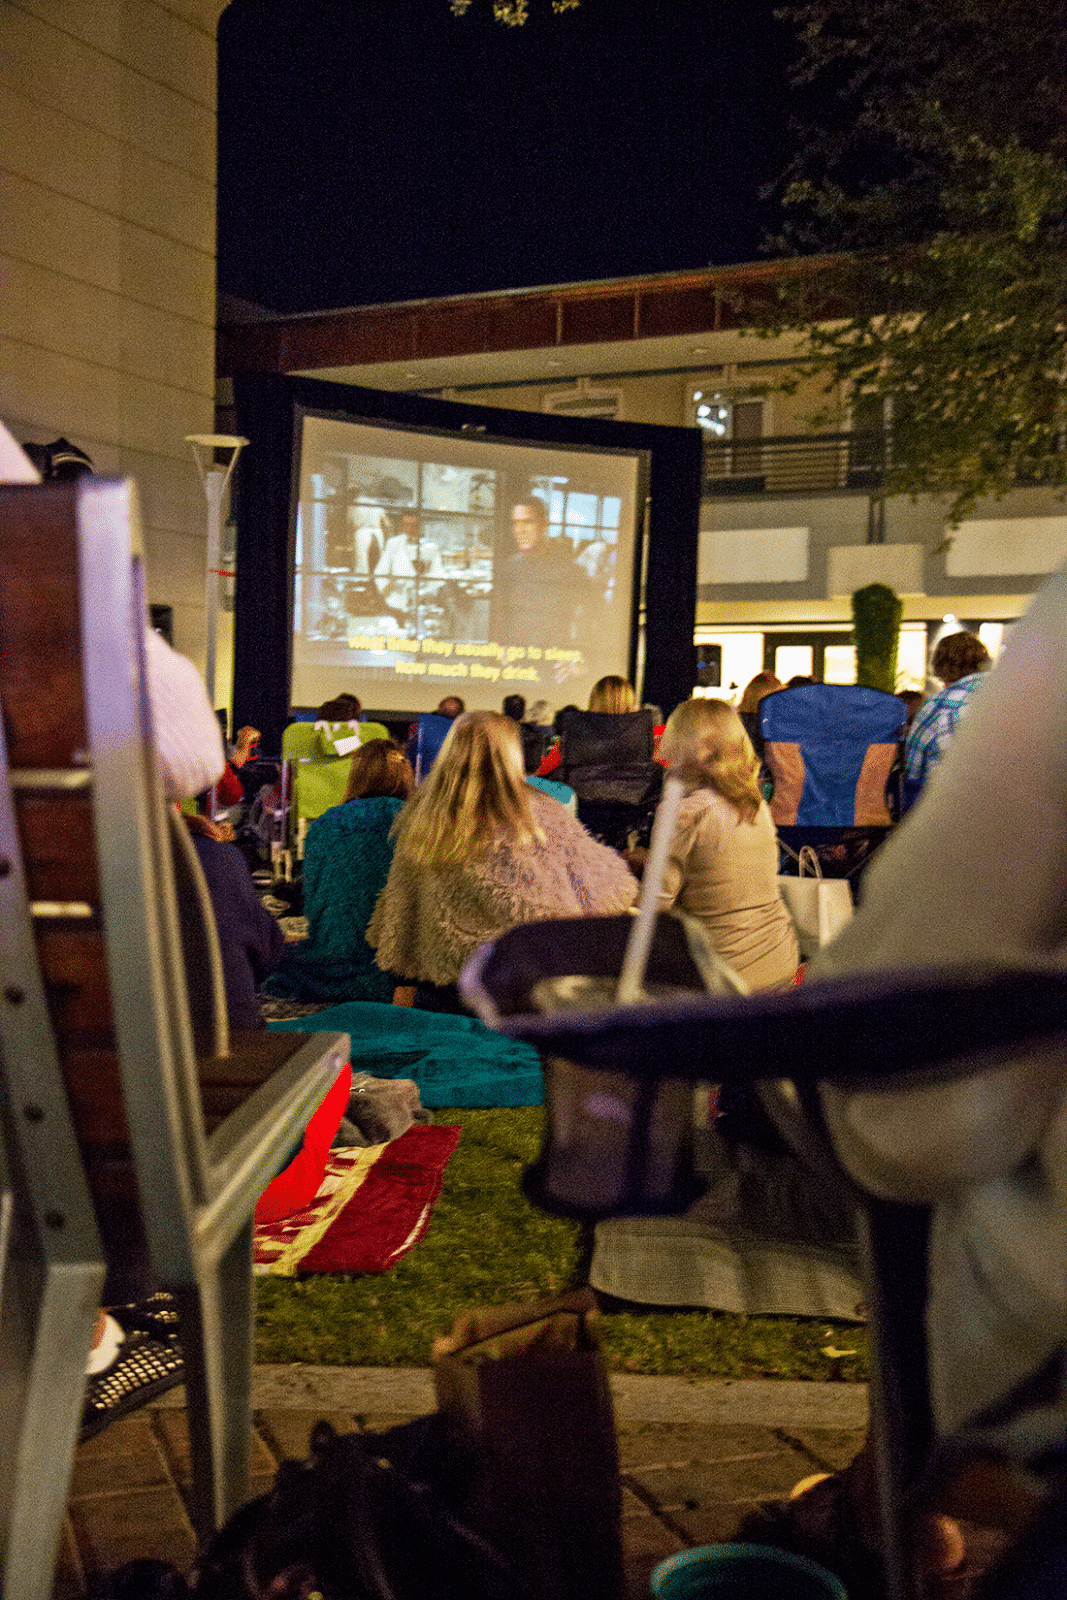 People enjoying Biltmore movies in the park on the grass. 